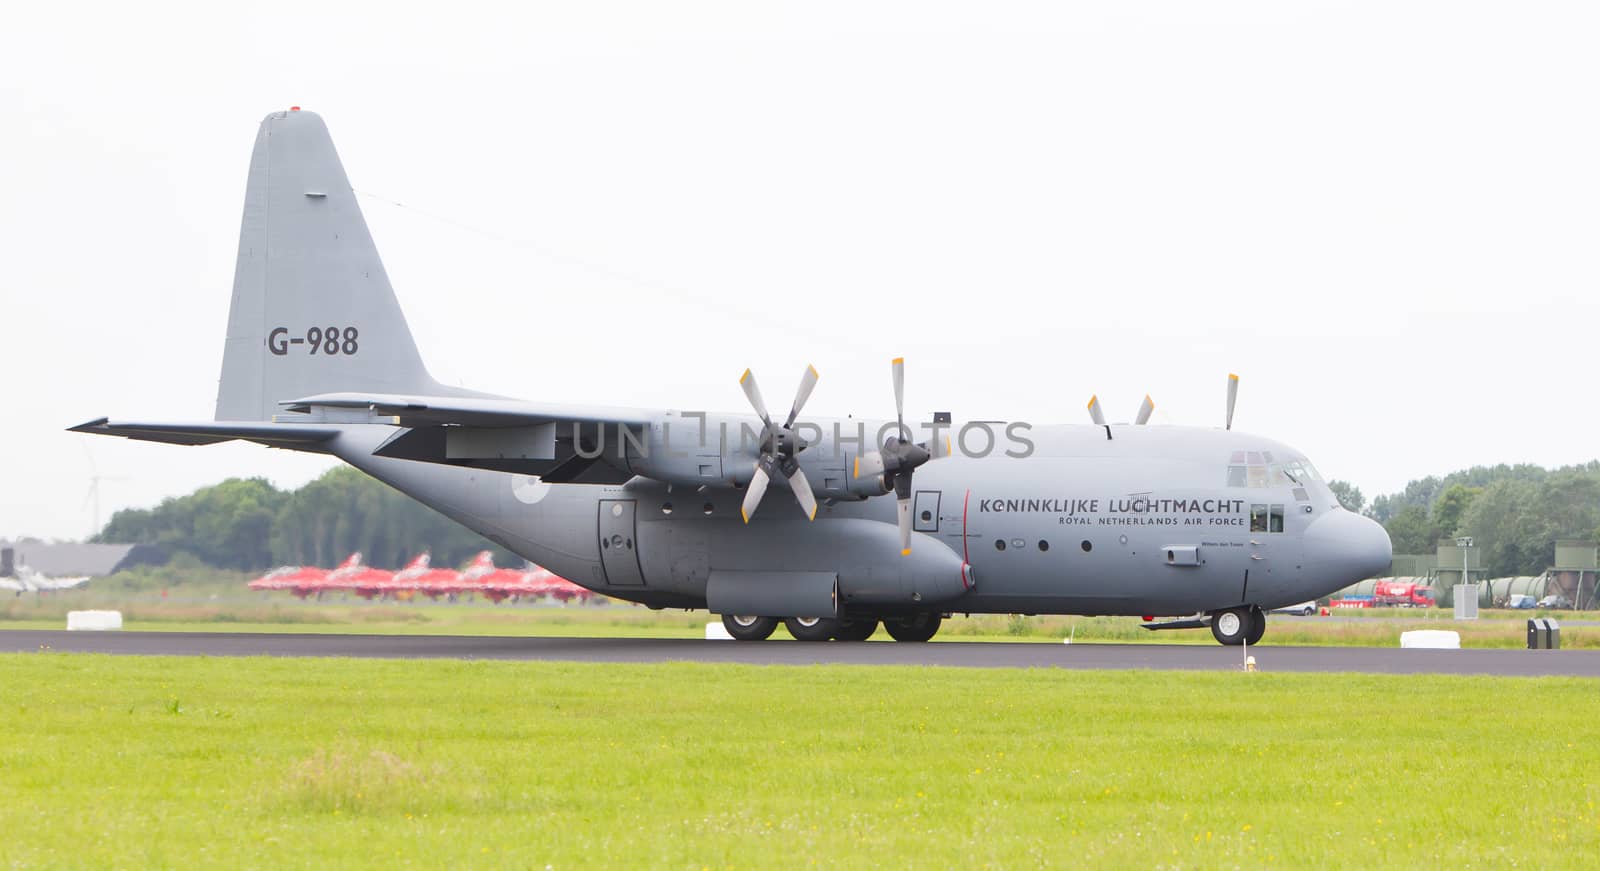 LEEUWARDEN, THE NETHERLANDS - JUNE 10, 2016: Dutch Air Force Lockheed C-130H-30 Hercules (L-382) [G-273] during a demonstration at the Royal Netherlands Air Force Days on june 10, Leeuwarden, The Netherlands